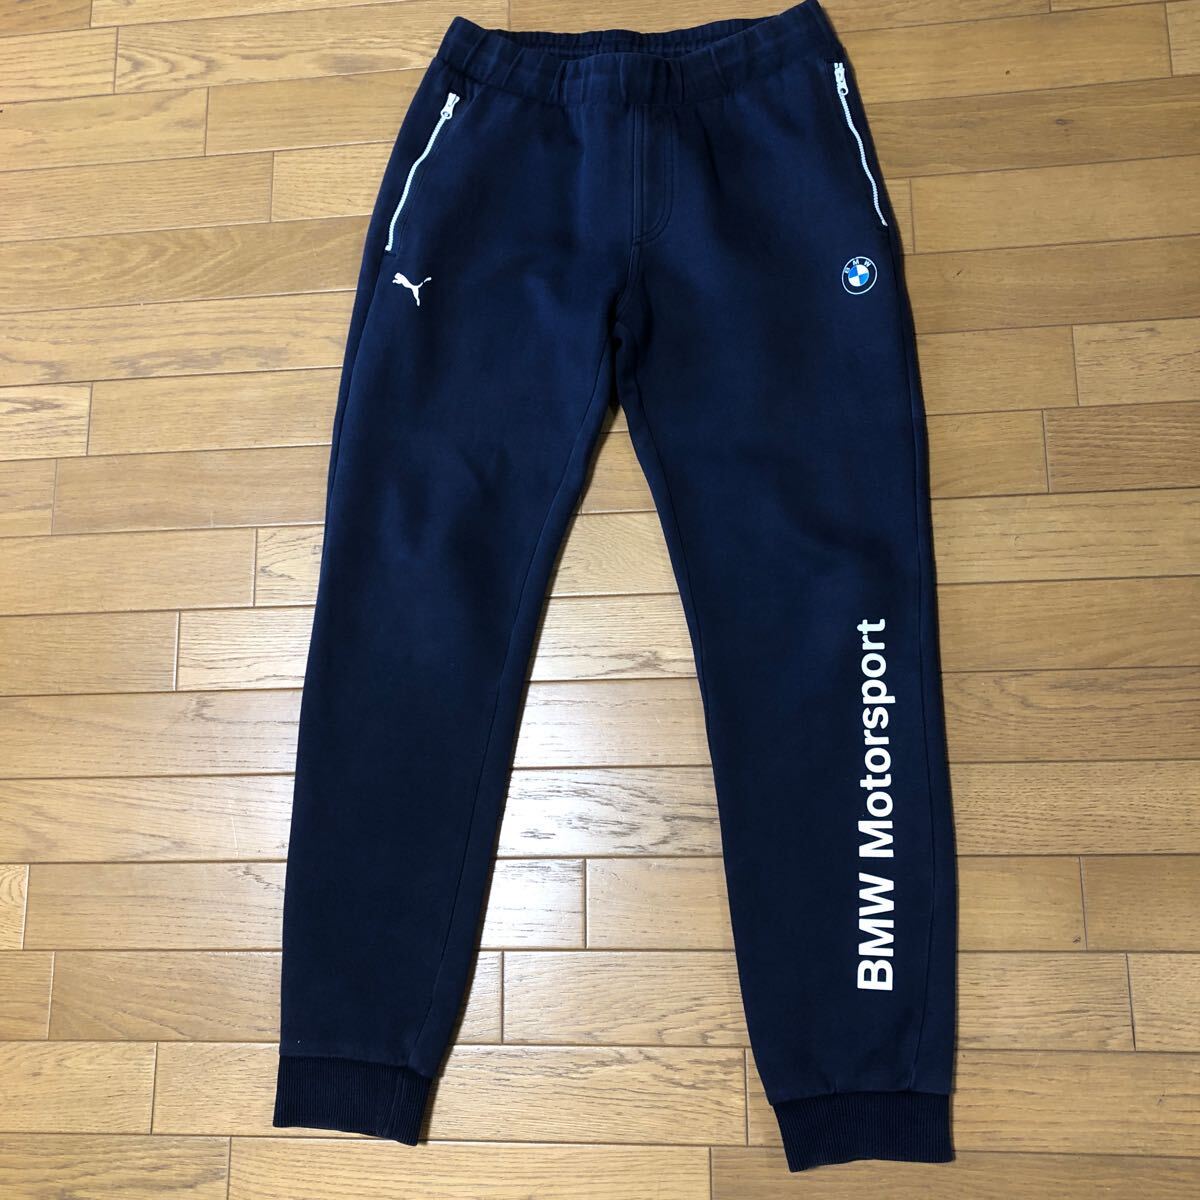  Puma BMW sweat pants top and bottom size M navy free shipping 